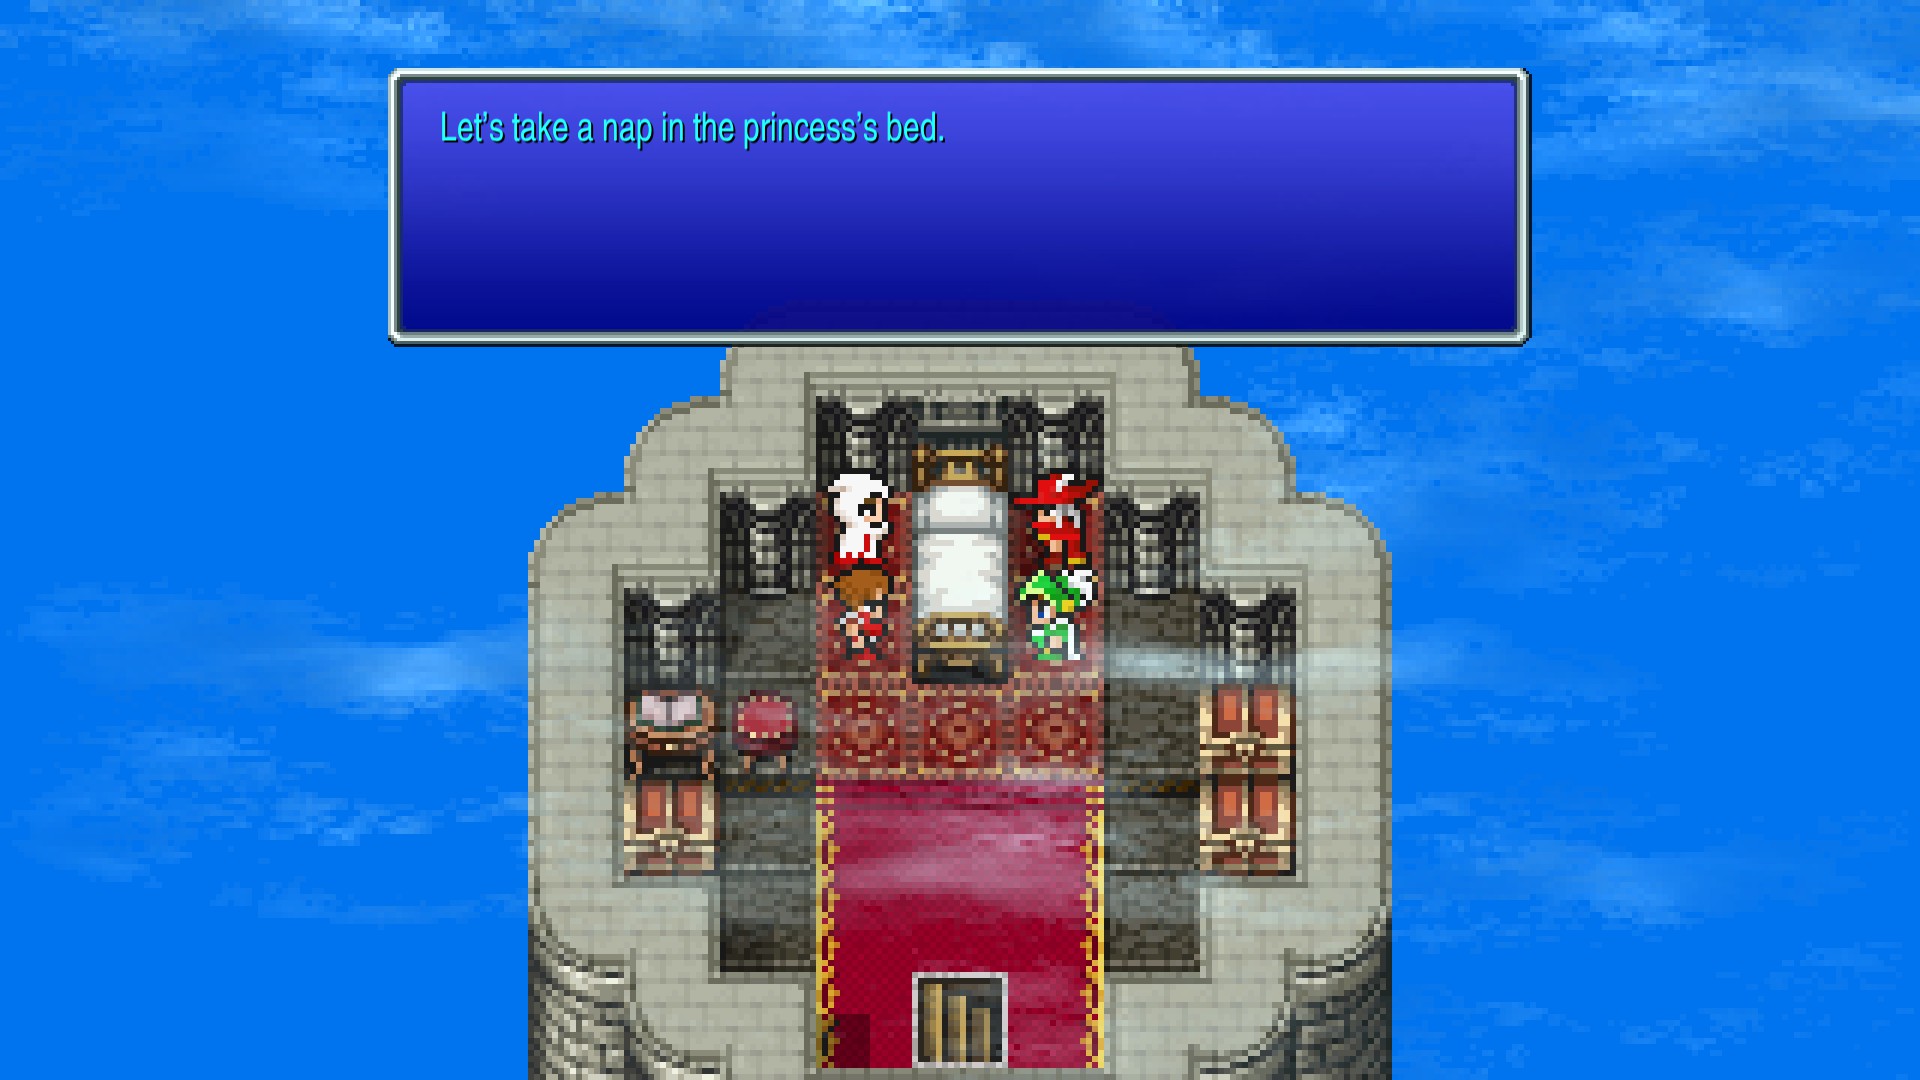 Screenshot from FF3 Pixel Remaster. The player characters are gathered around the bed in a fancy looking room. The dialogue box says: Let's all take a nap in the princess's bed.